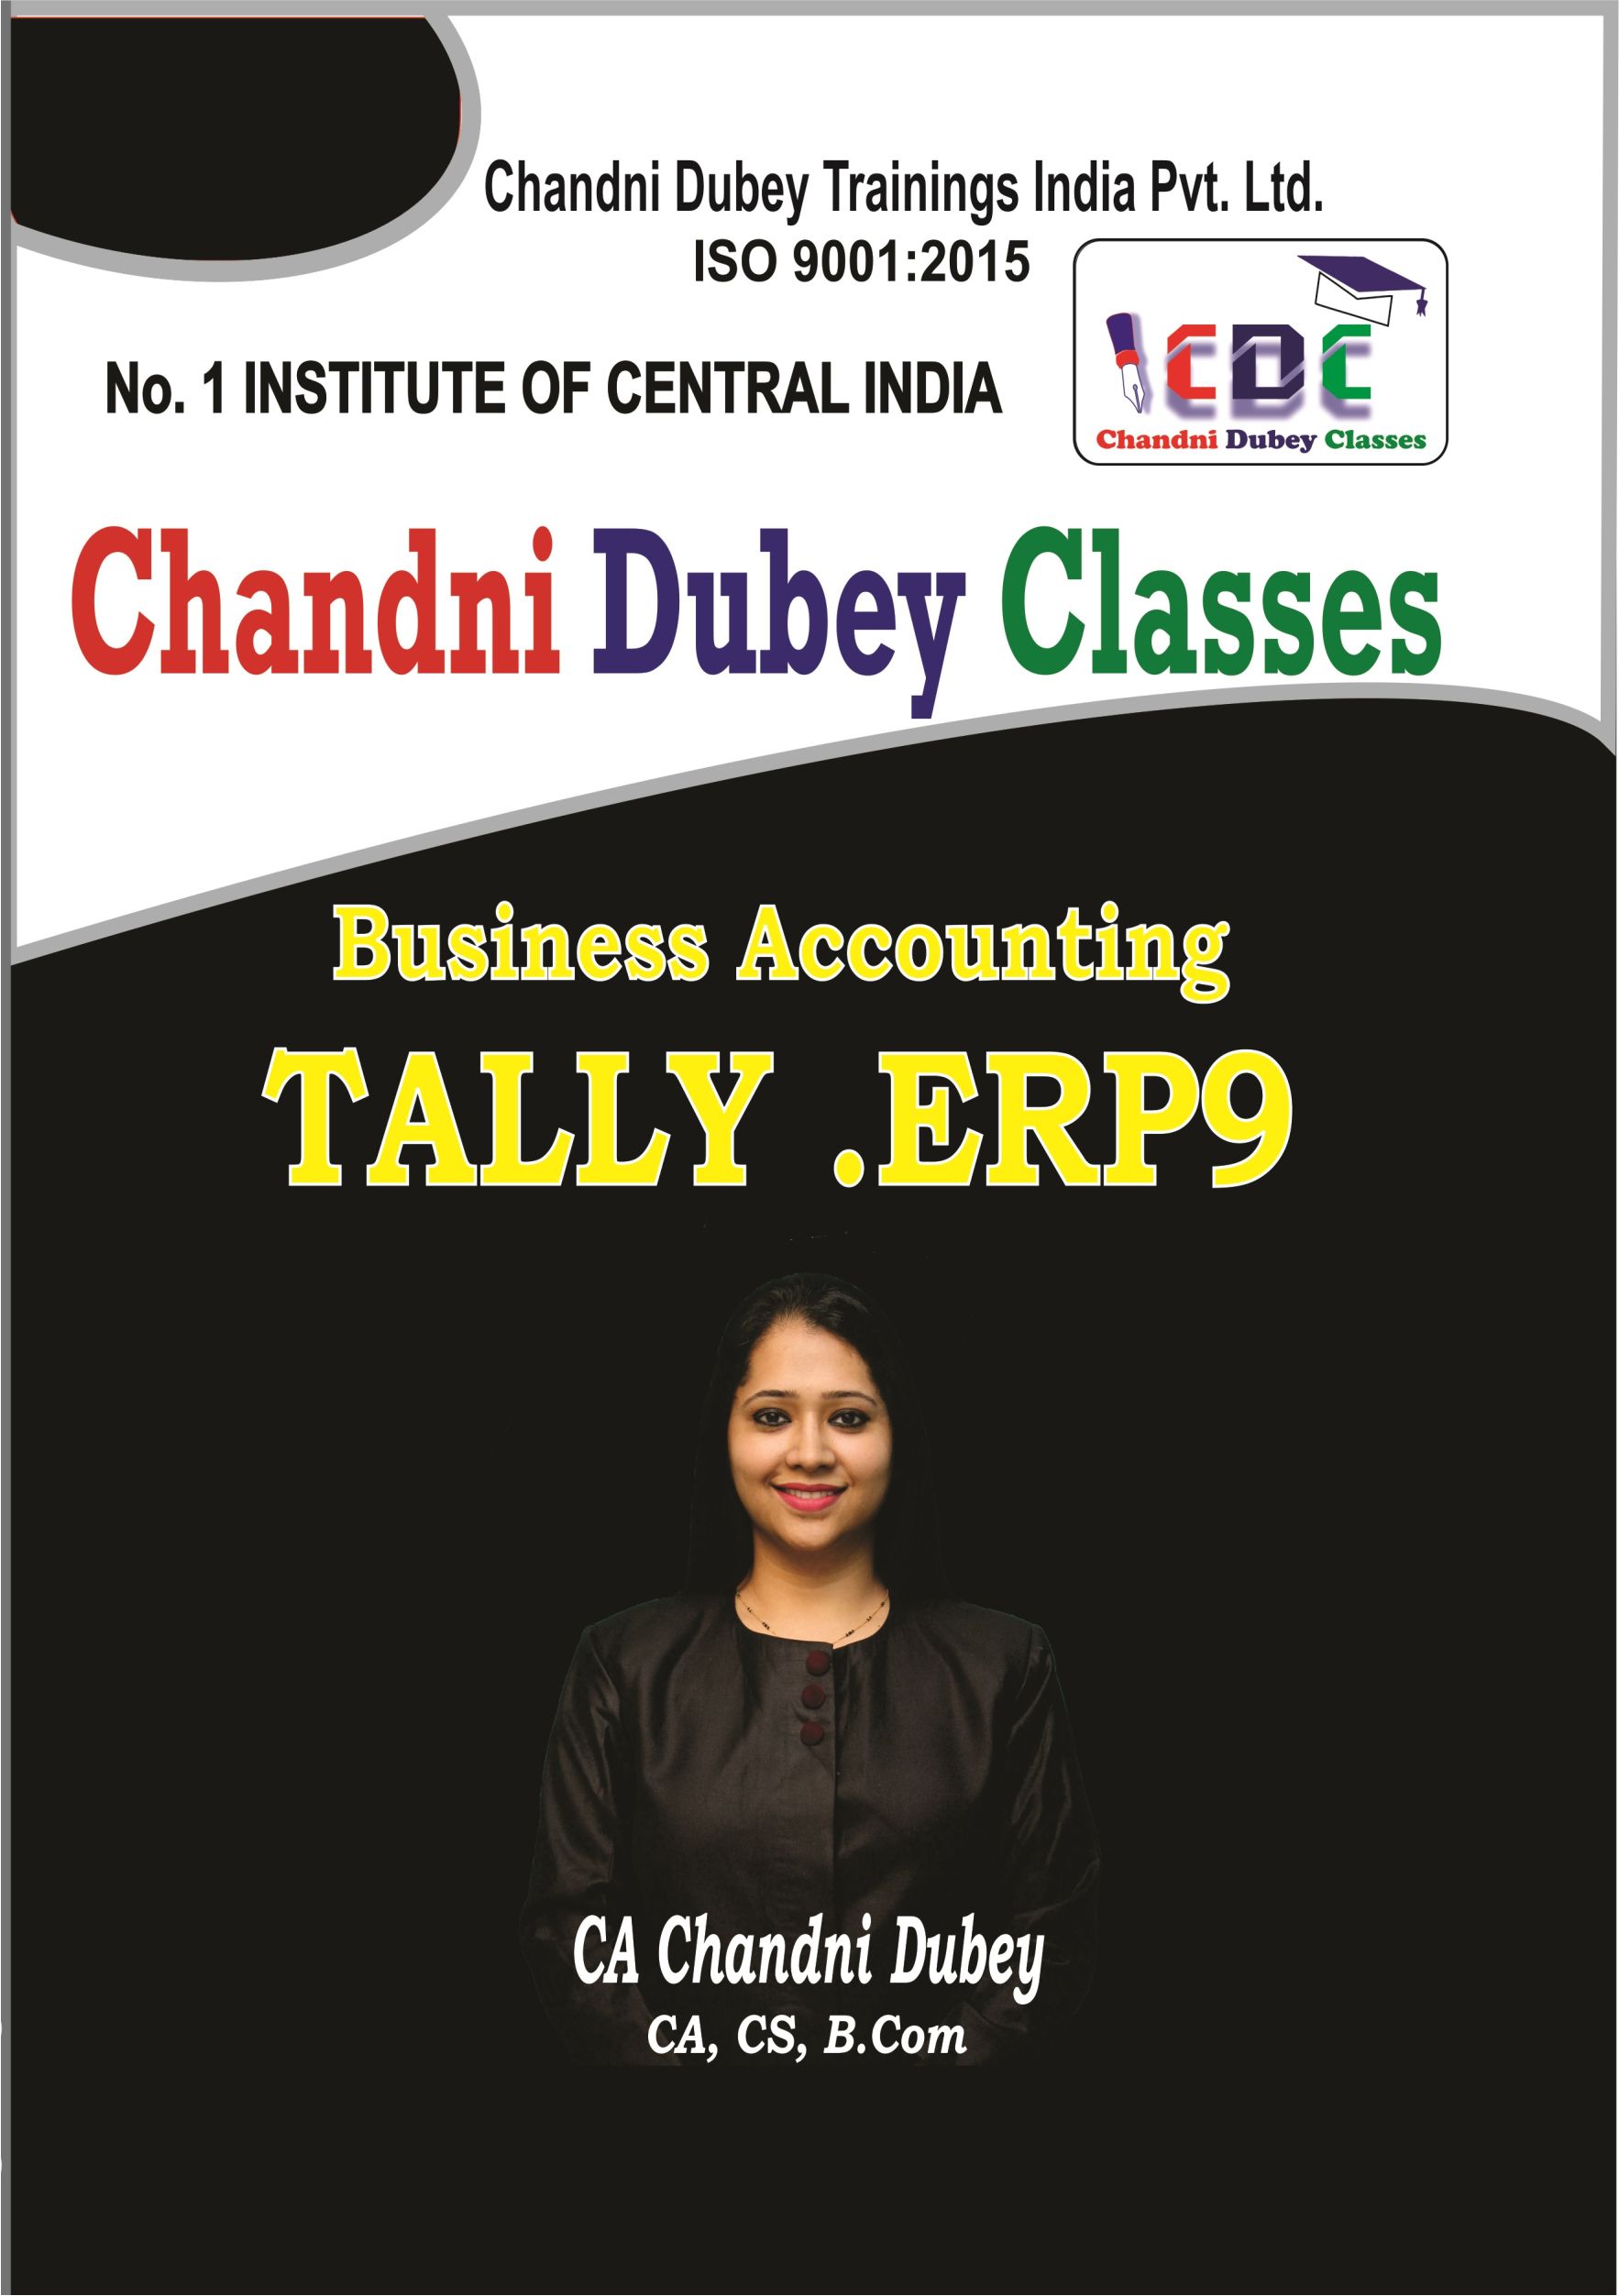 Business Accounting Tally .ERP9